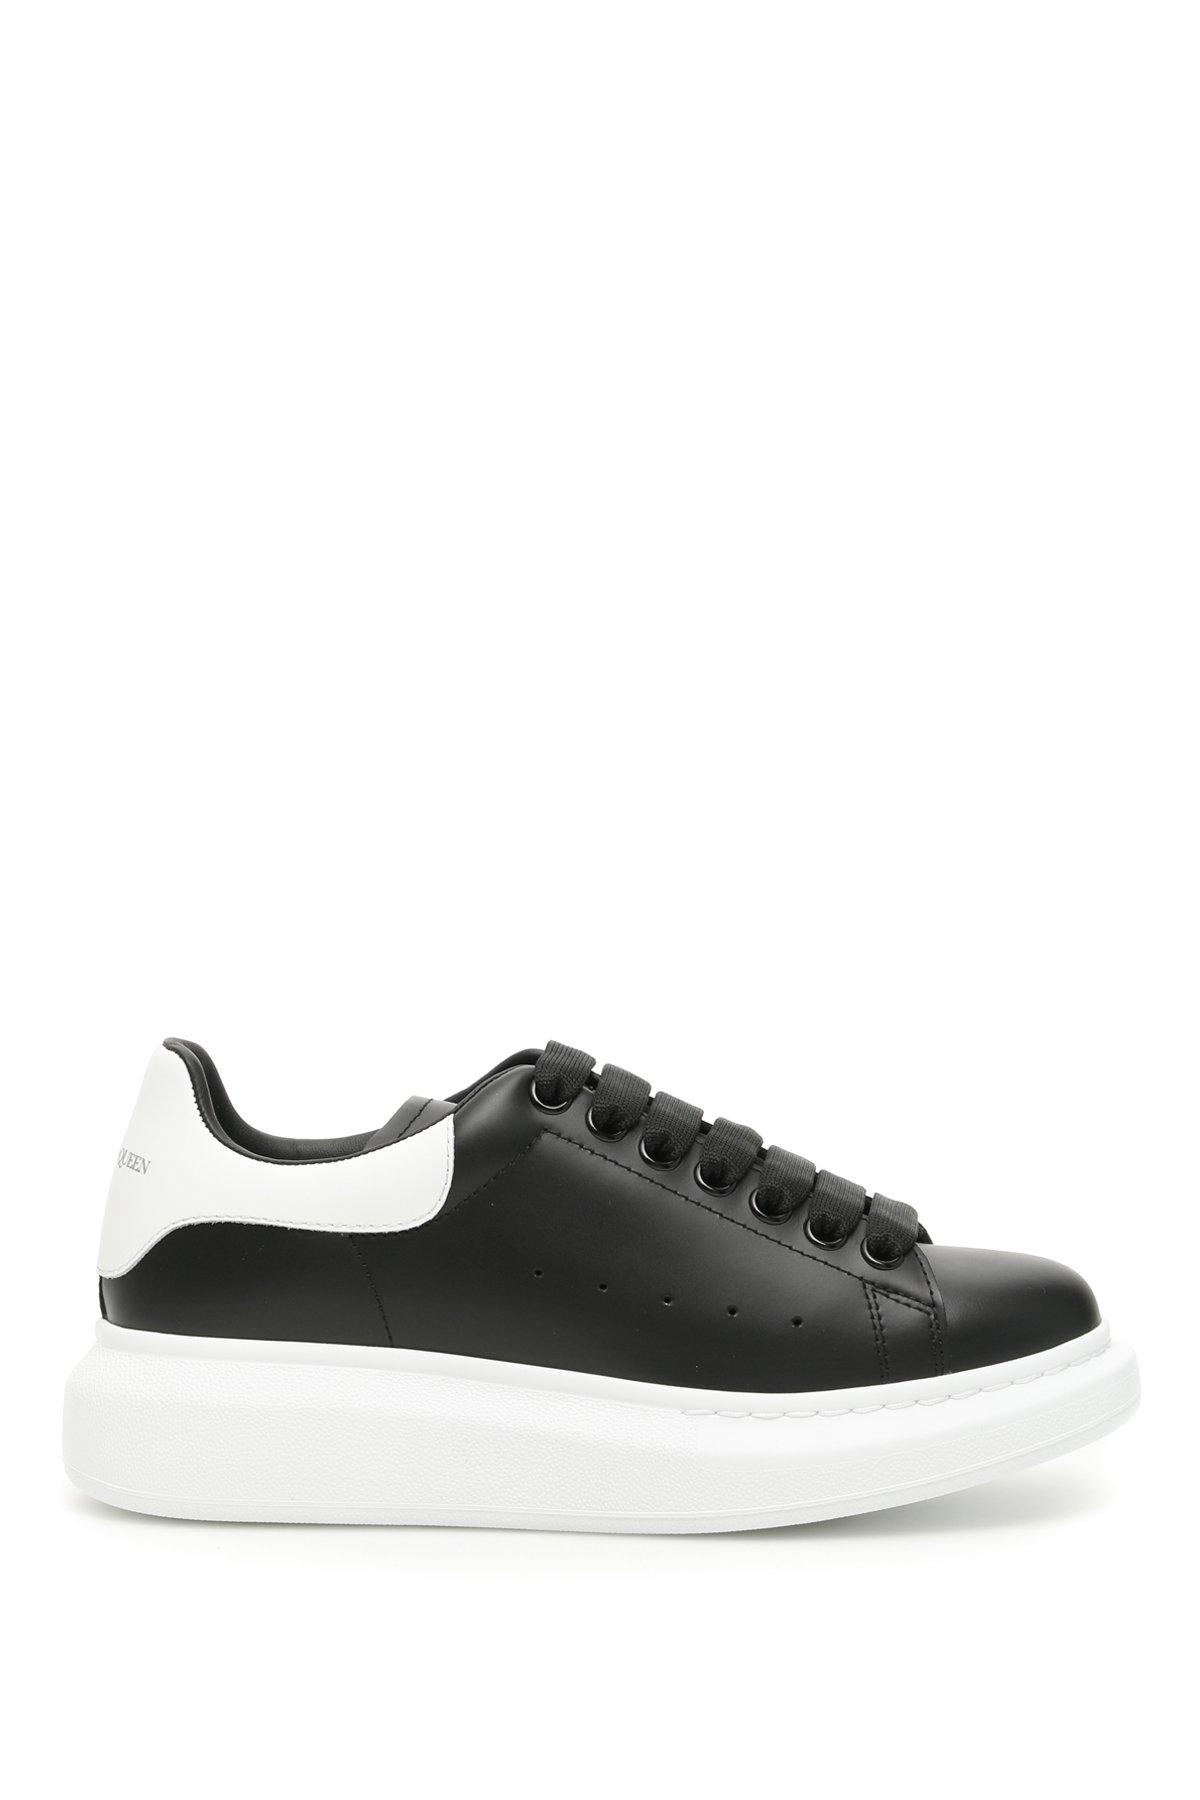 Alexander McQueen Leather Oversized Sole Sneakers Black/white - Save 39% -  Lyst